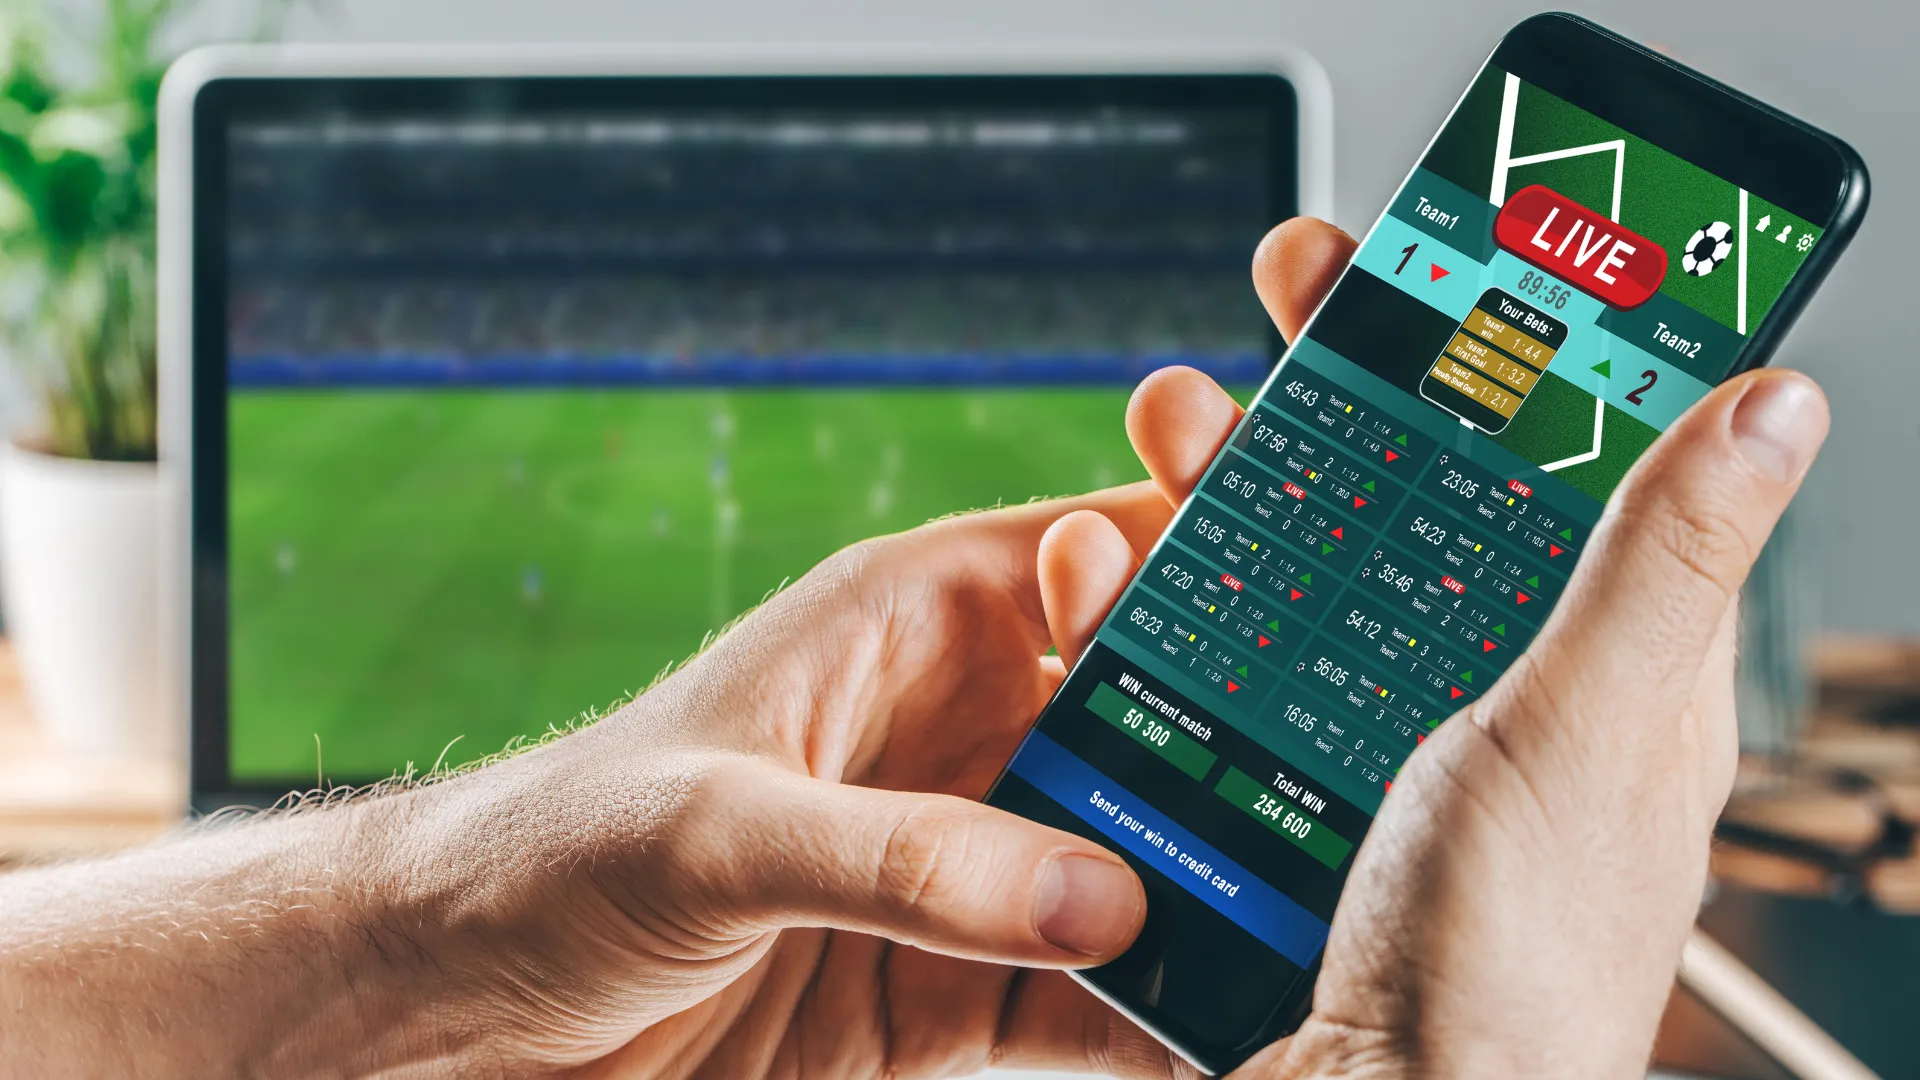 One common sports betting scam involves scammers offering "insider information" or "guaranteed wins" for a fee, but the information provided is often fake.